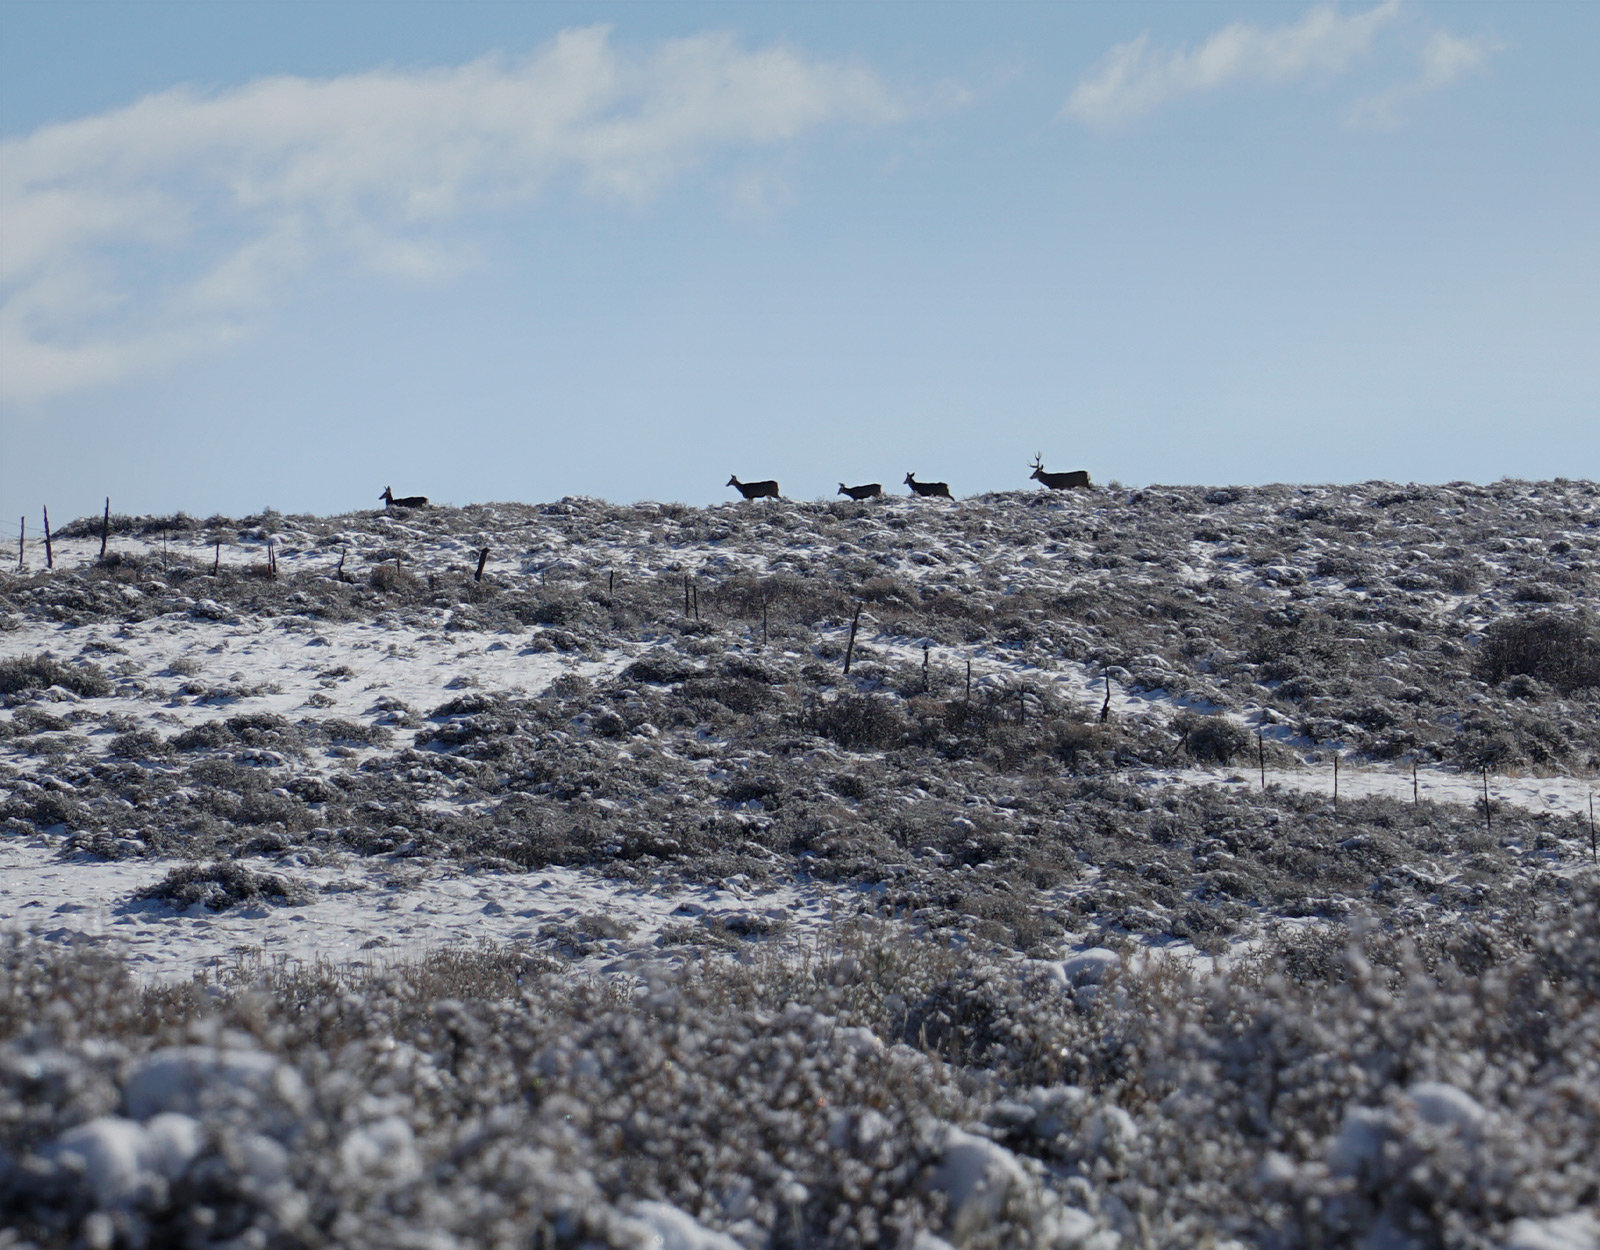 Multiple deer moving across snow covered land